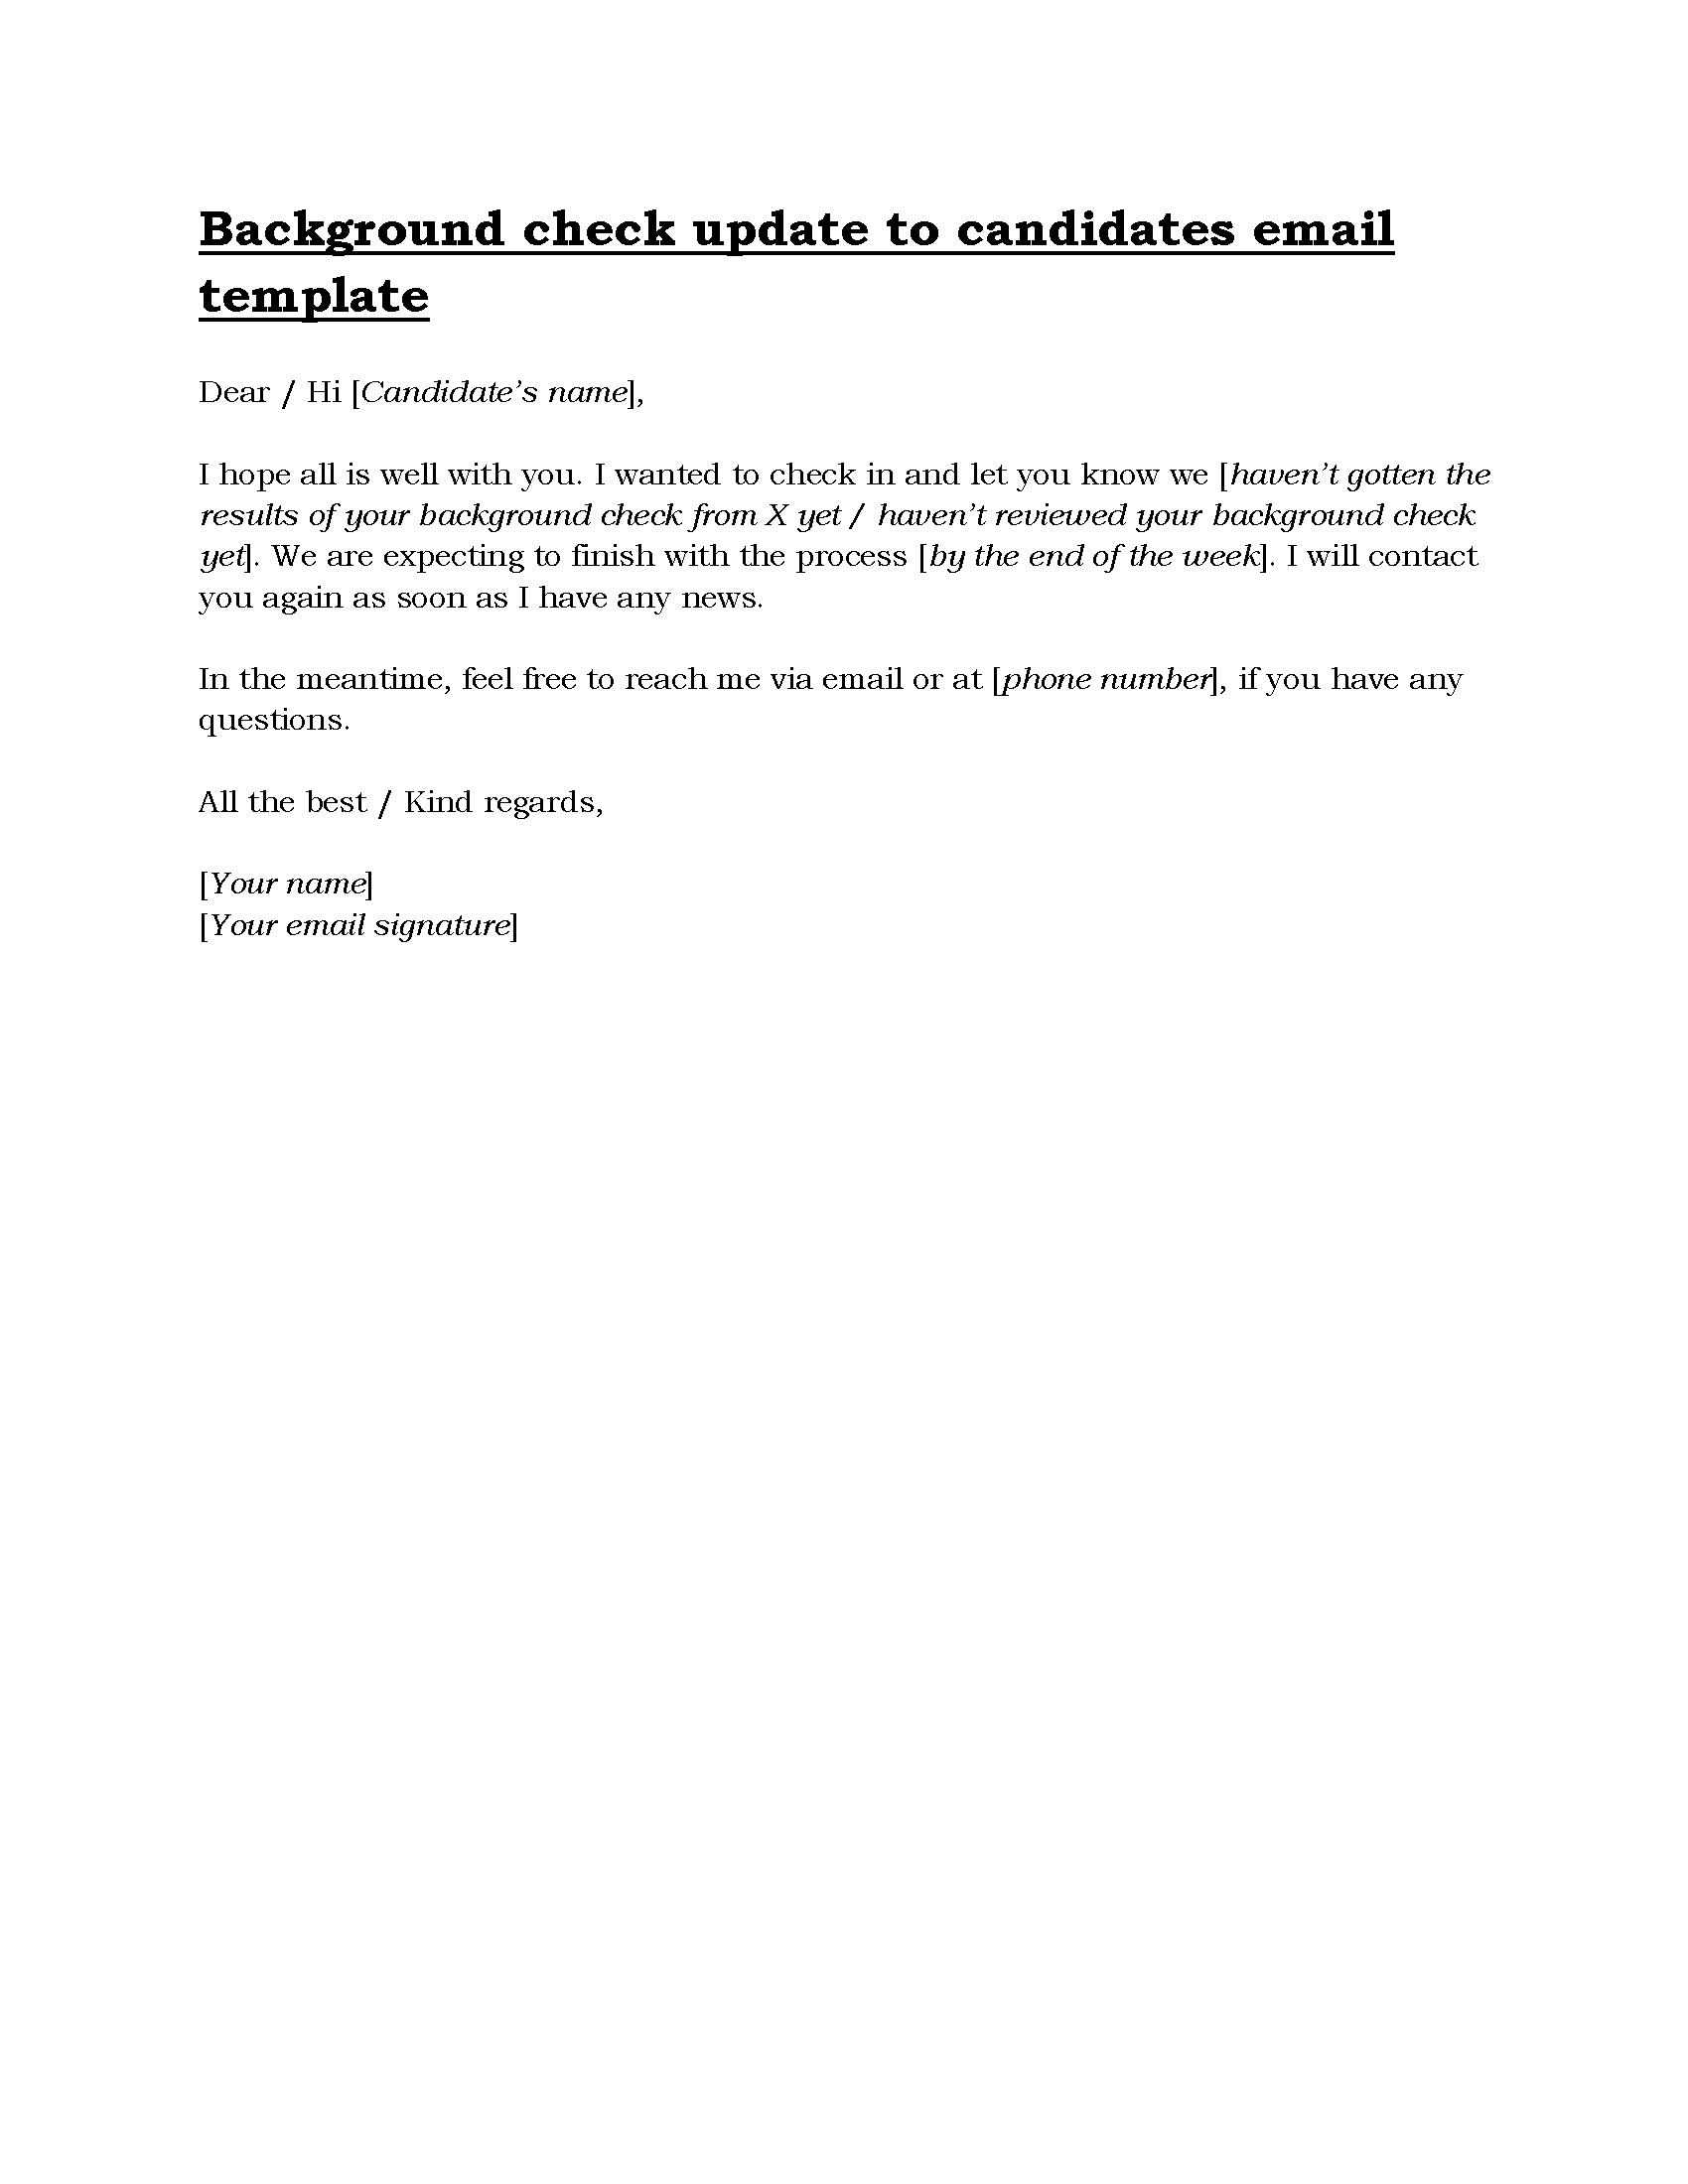 01- Background-check-update-to-candidates-email-template